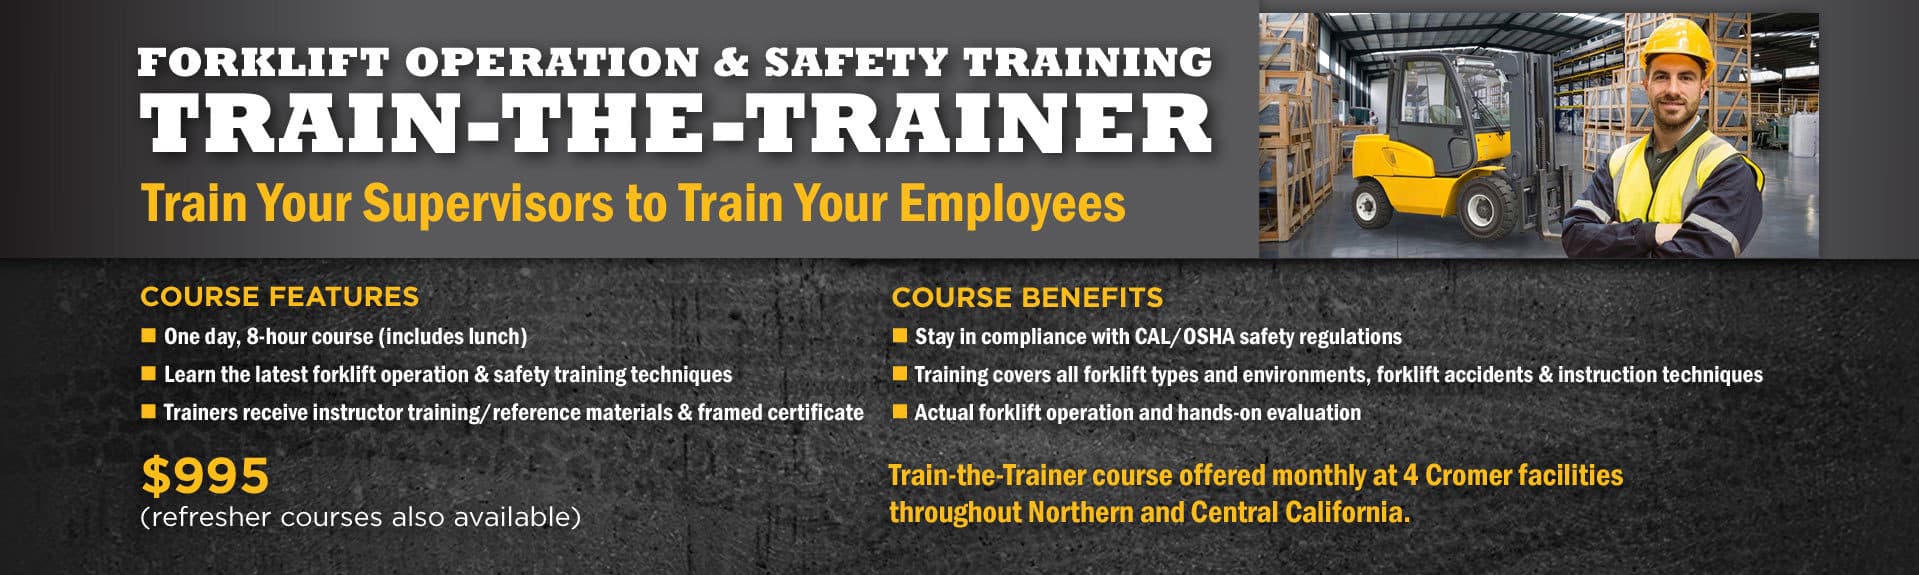 Train the Trainer Forklift Classes